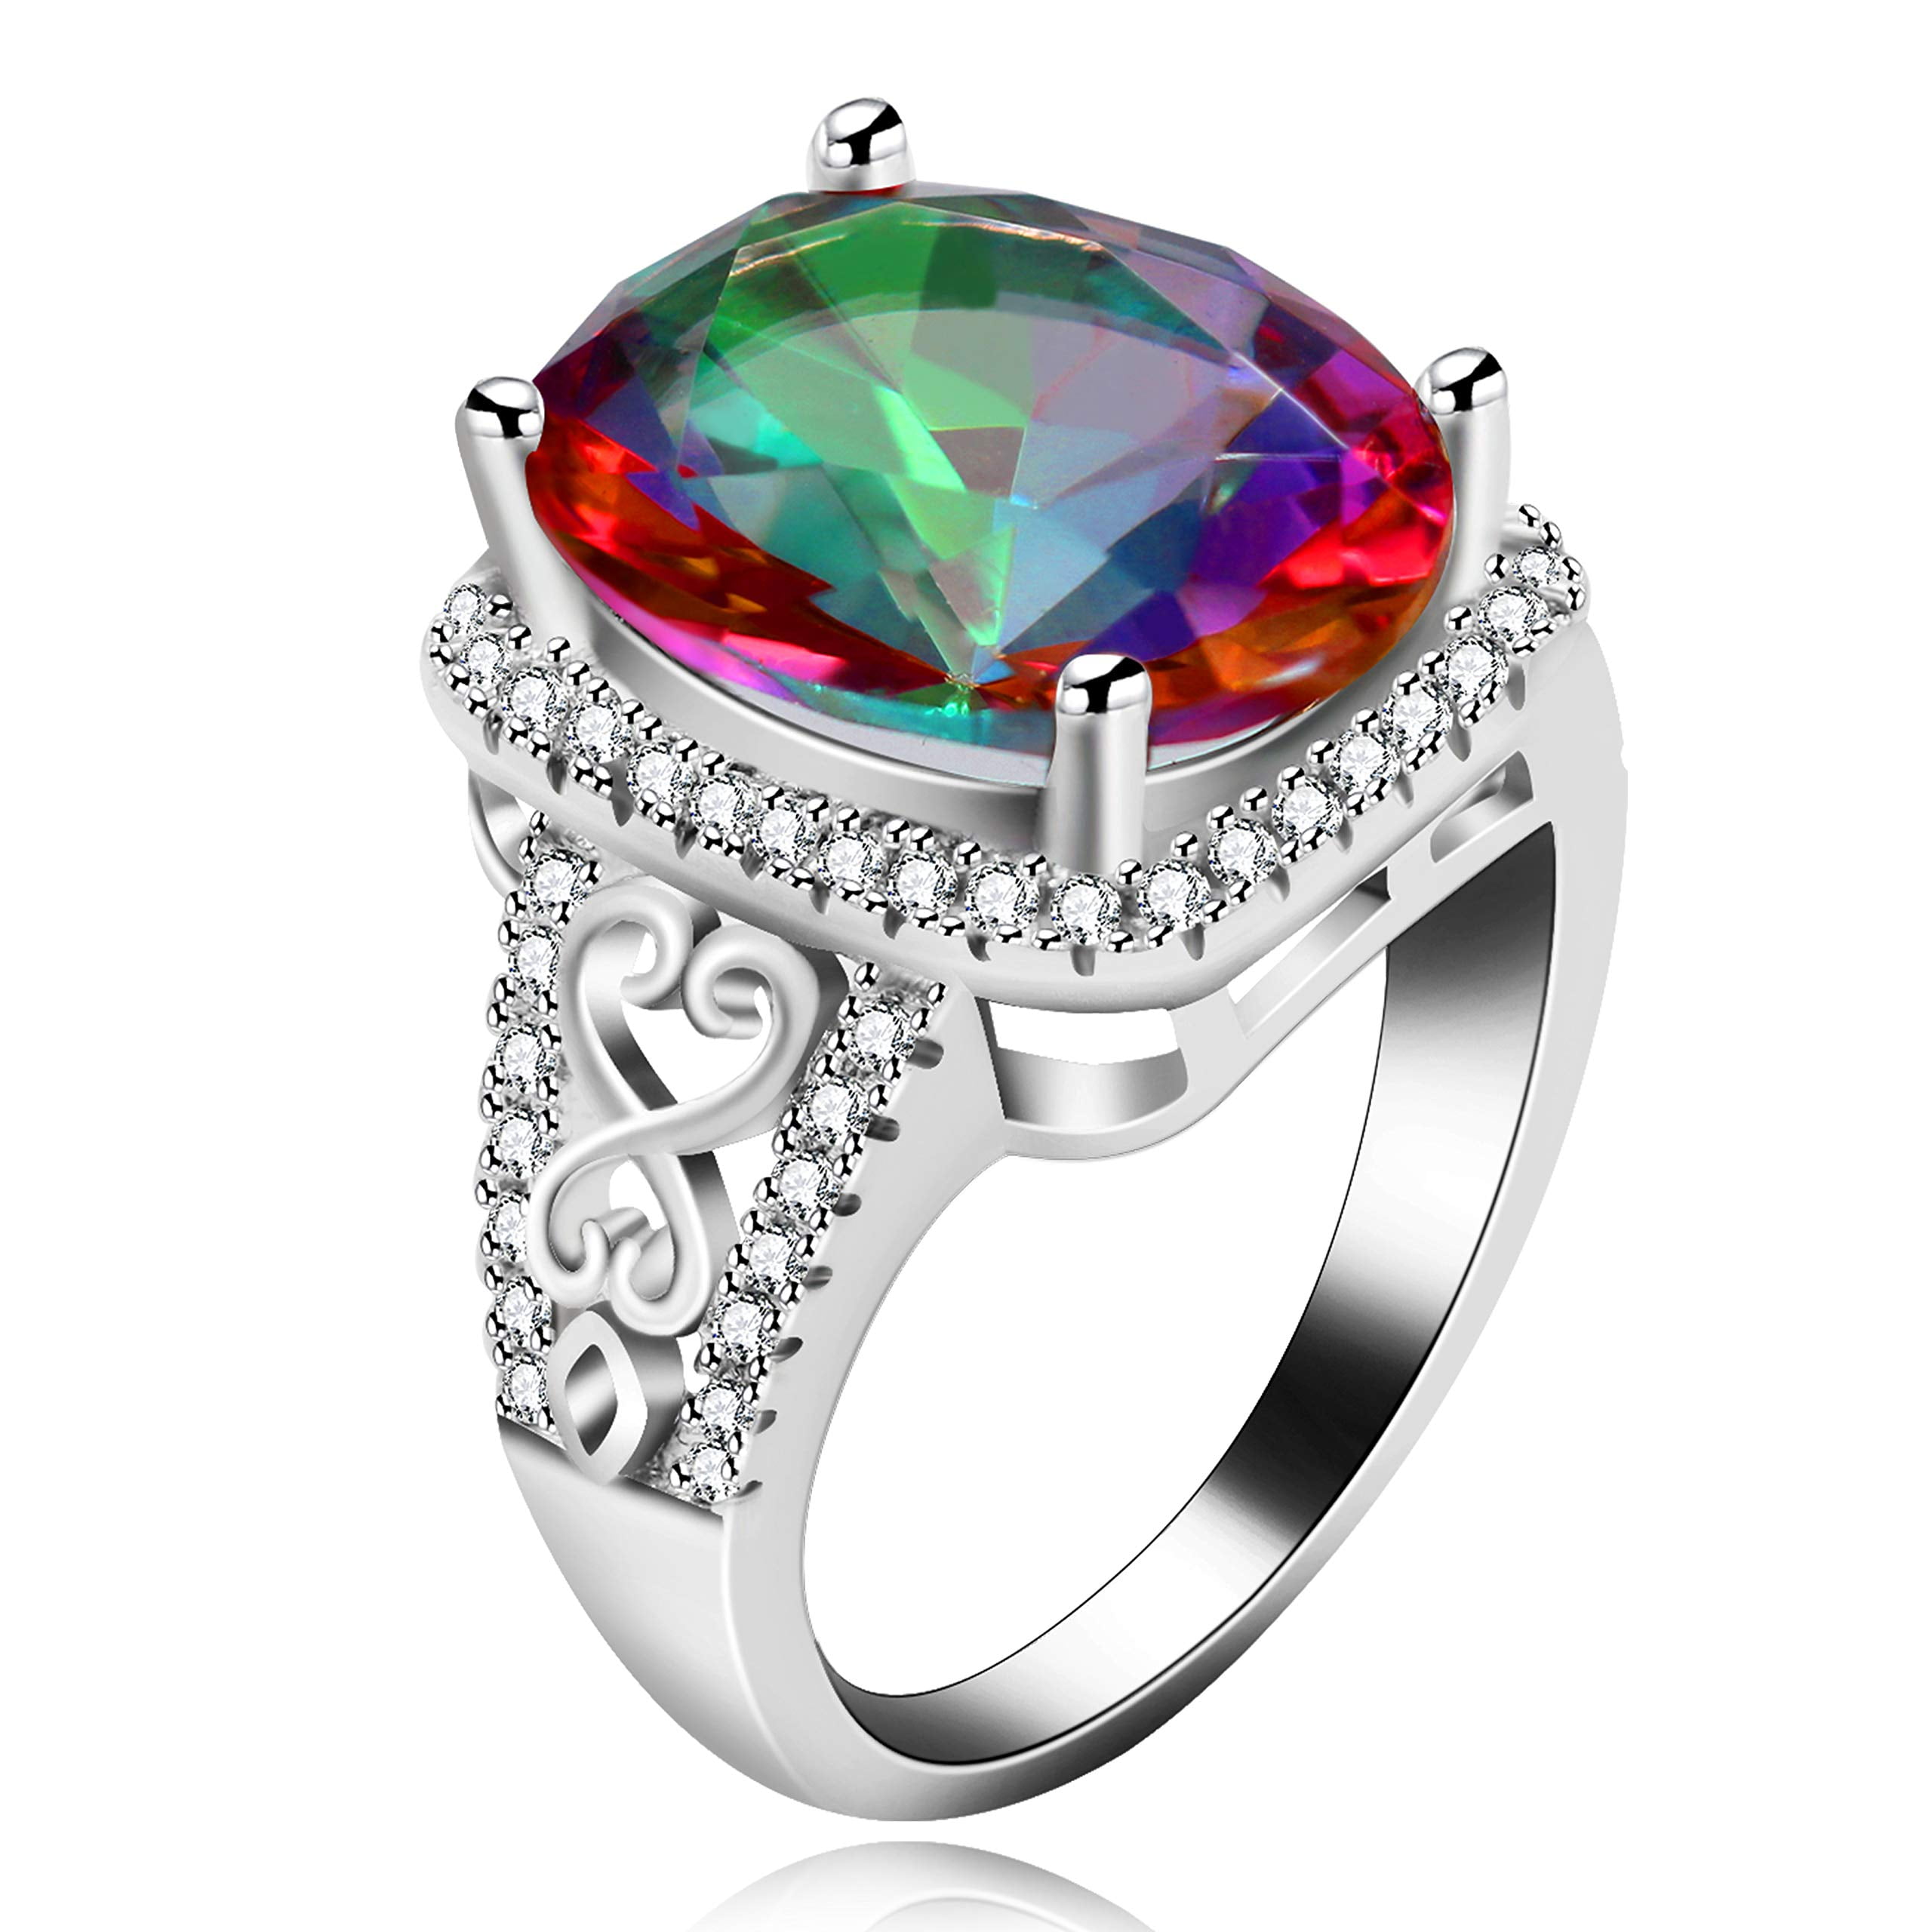 NEW MULTICOLOR CAT EYE CZ COCKTAIL RING WOMENS SZ 6 7 8 